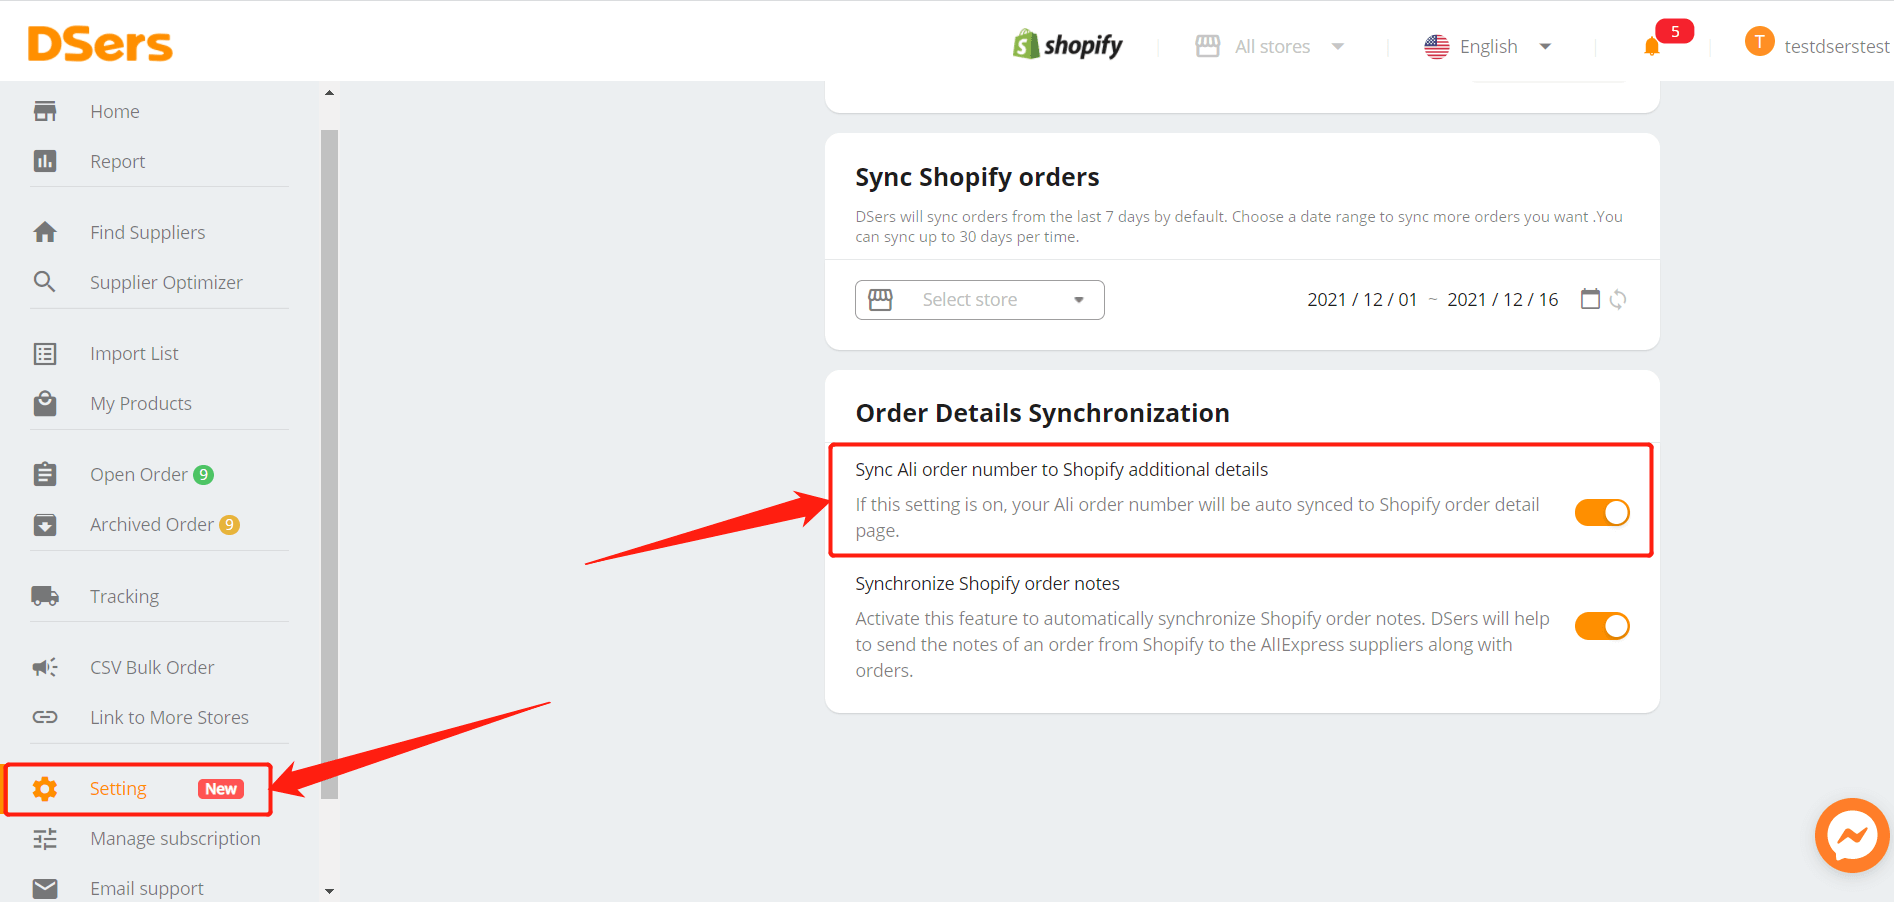 Set tracking for your orders - go to Setting - Synchronization and scroll down to find Order Details Synchronization - DSers